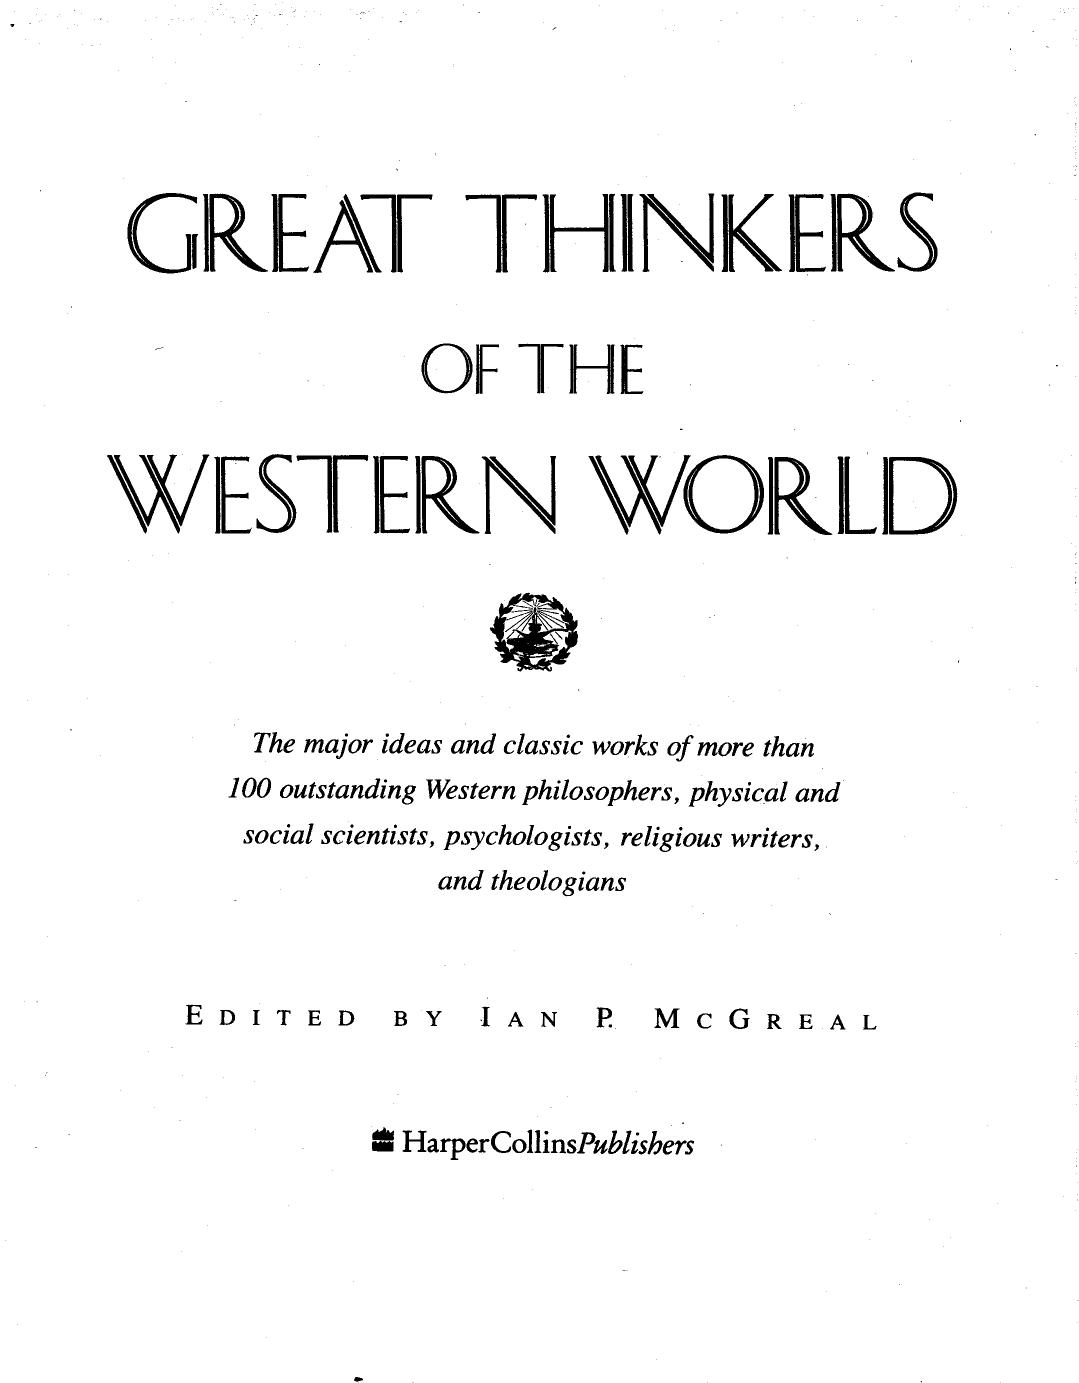 Great Thinkers of the Western World